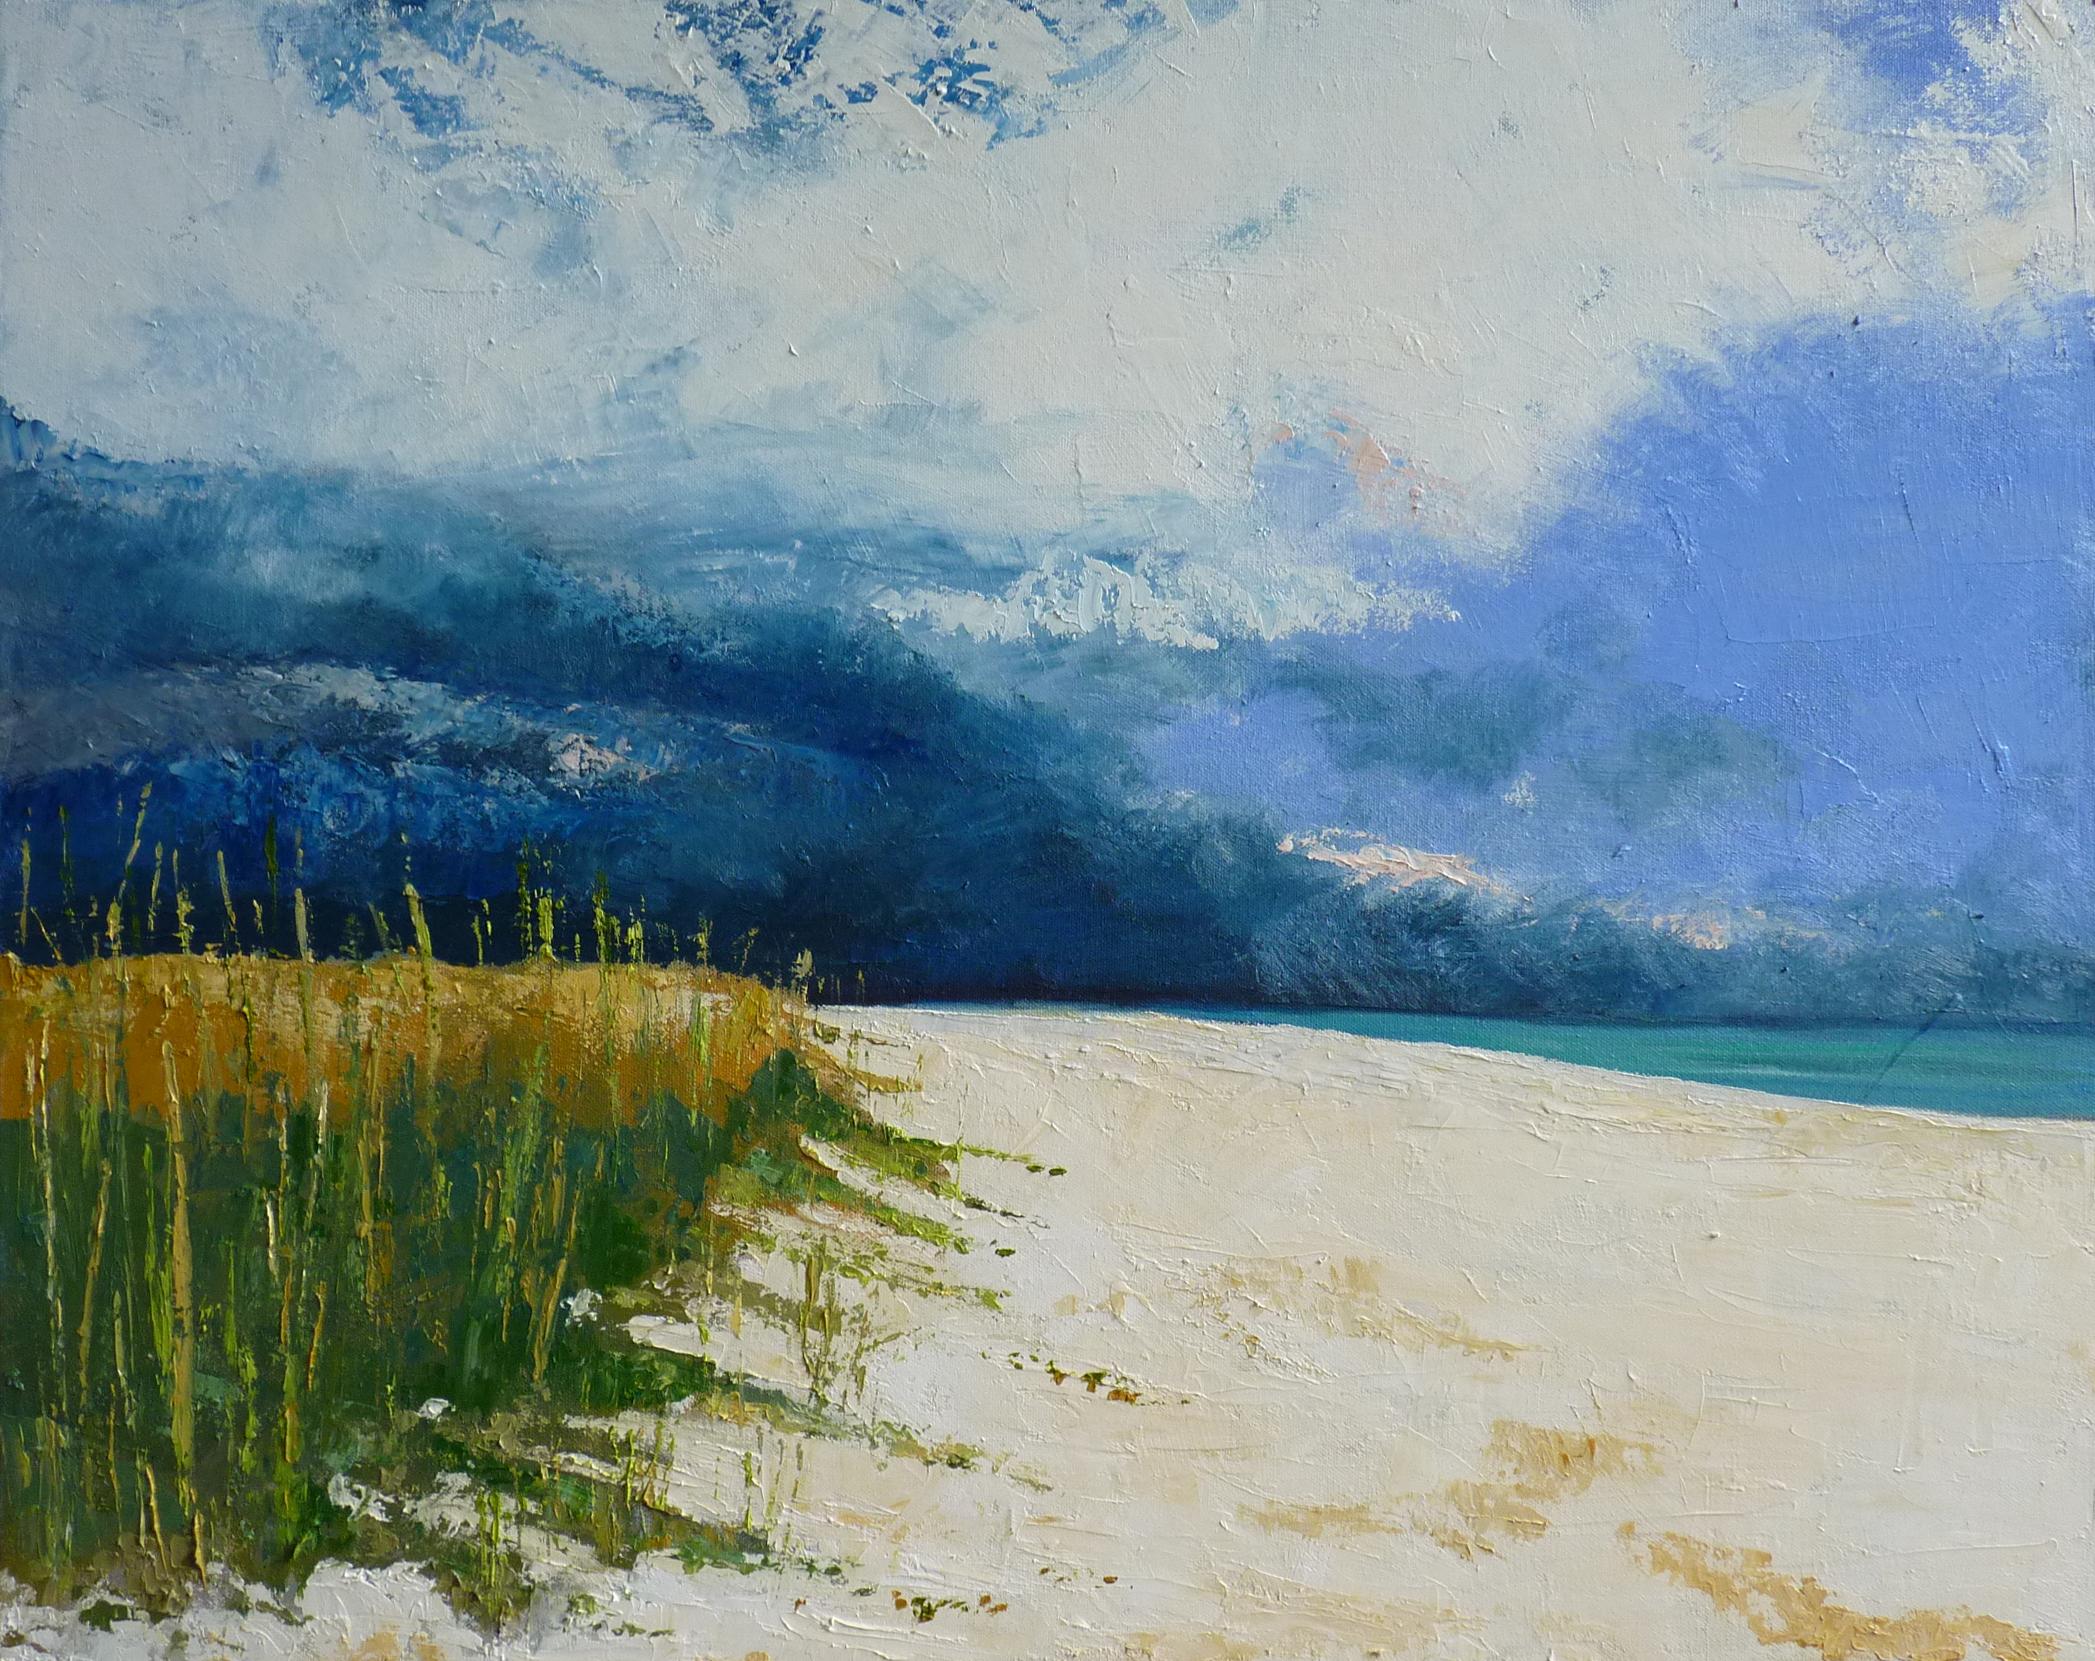 Squall Line, Oil Painting - Art by Judy Mackey